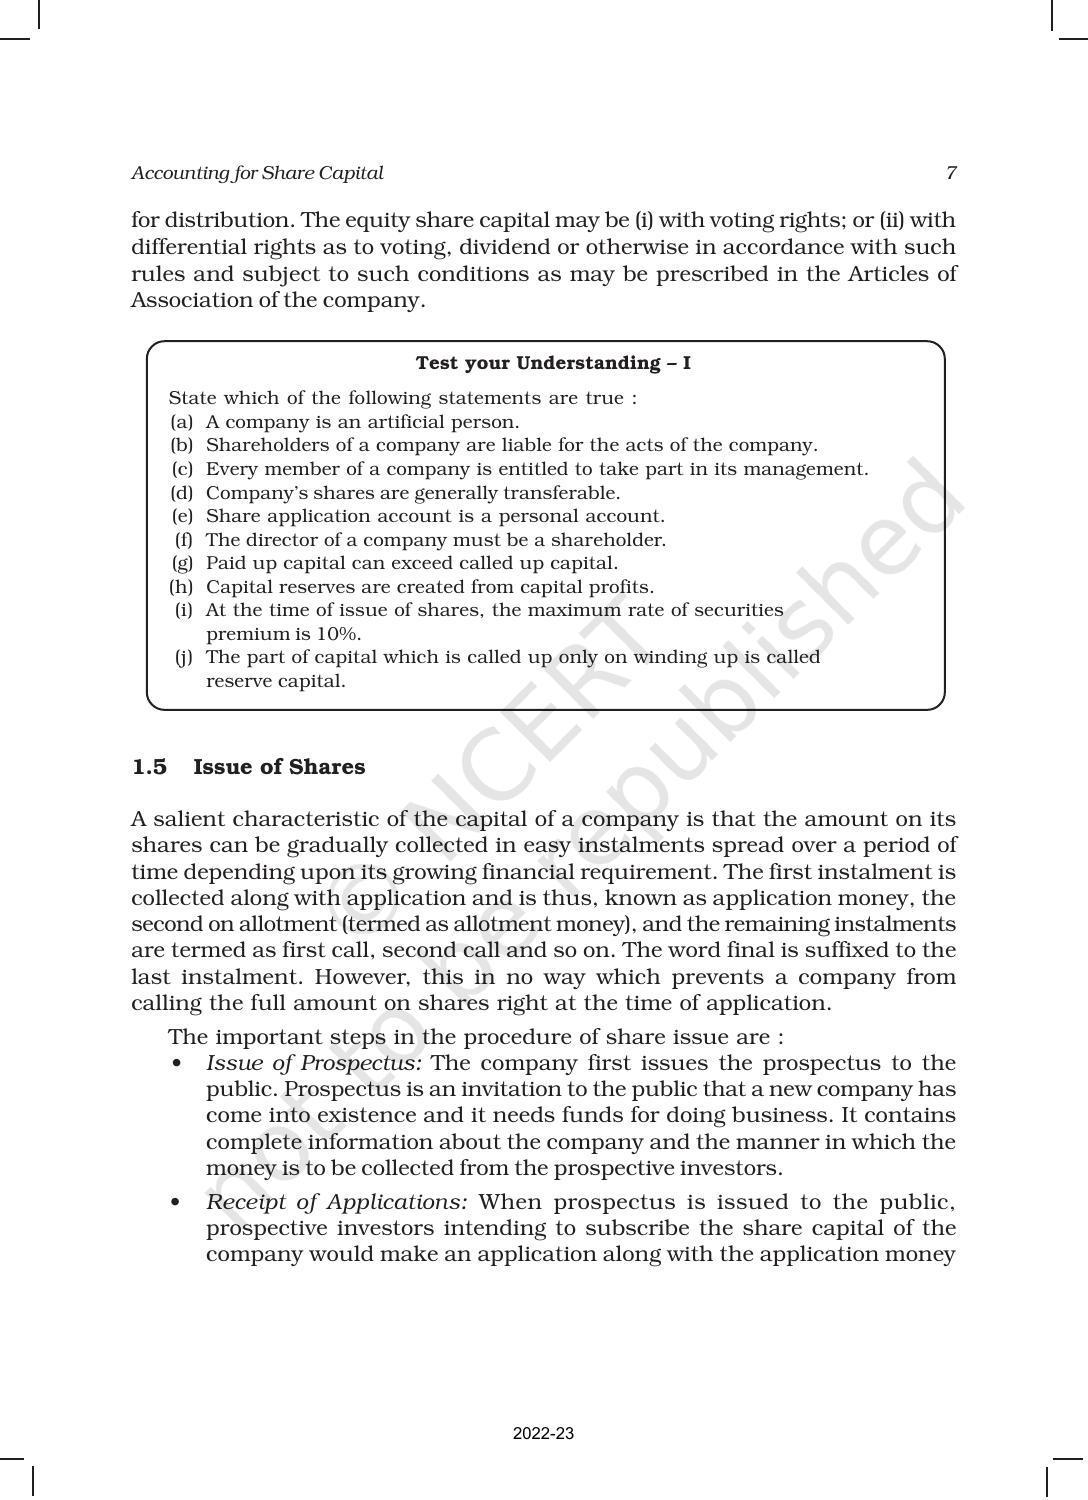 NCERT Book for Class 12 Accountancy Part II Chapter 1 Accounting for Share Capital - Page 7